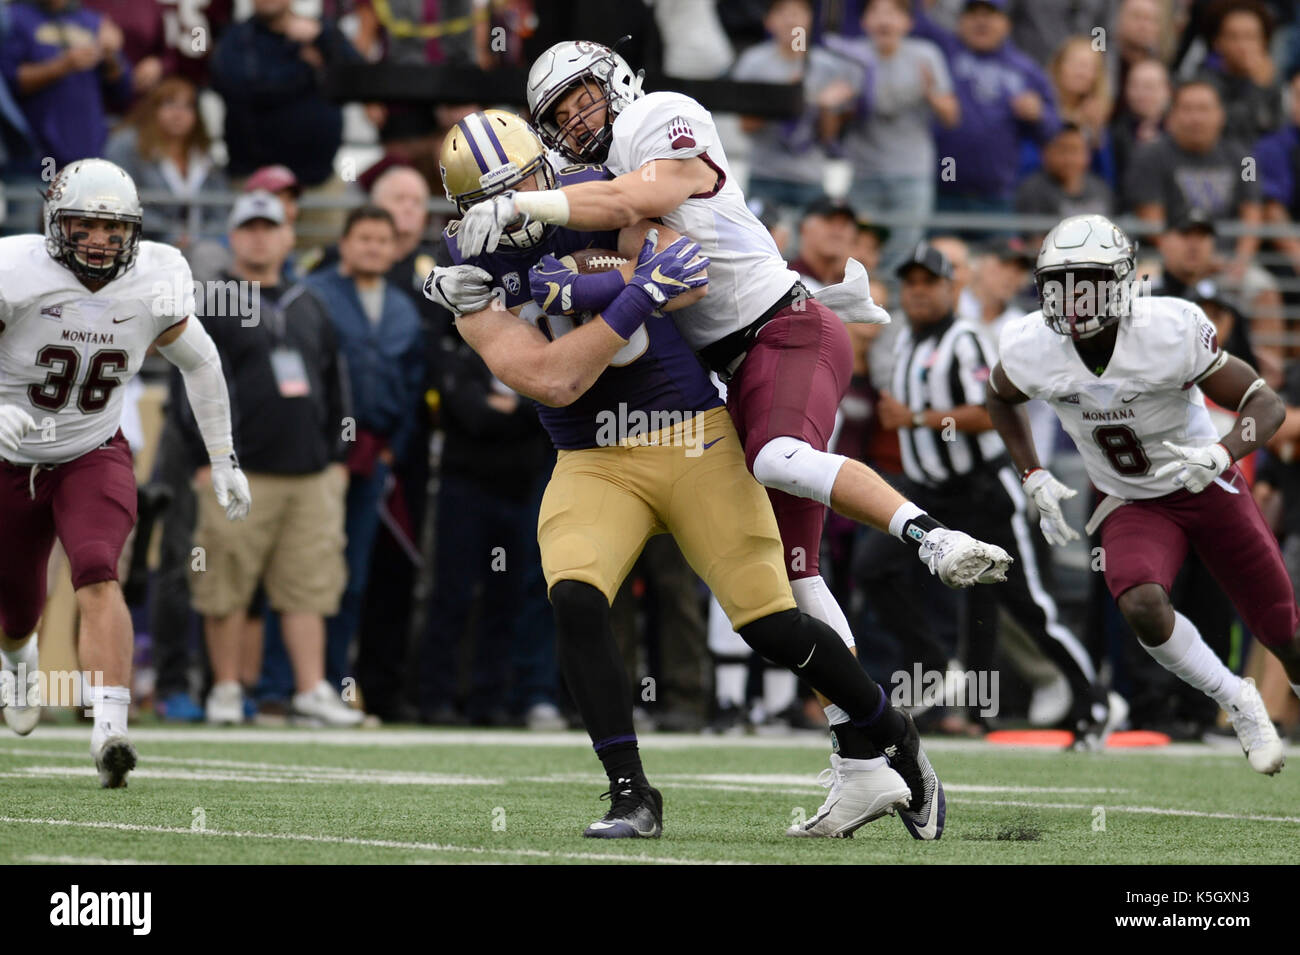 Seattle, WA, USA. 9th Sep, 2017. UW tight end Will Dissly (98) snags a pass against Montana's Josh Buss (42) during a NCAA football game between the Montana Grizzlies and the Washington Huskies. The game was played at Husky Stadium on the University of Washington campus in Seattle, WA. Jeff Halstead/CSM/Alamy Live News Stock Photo